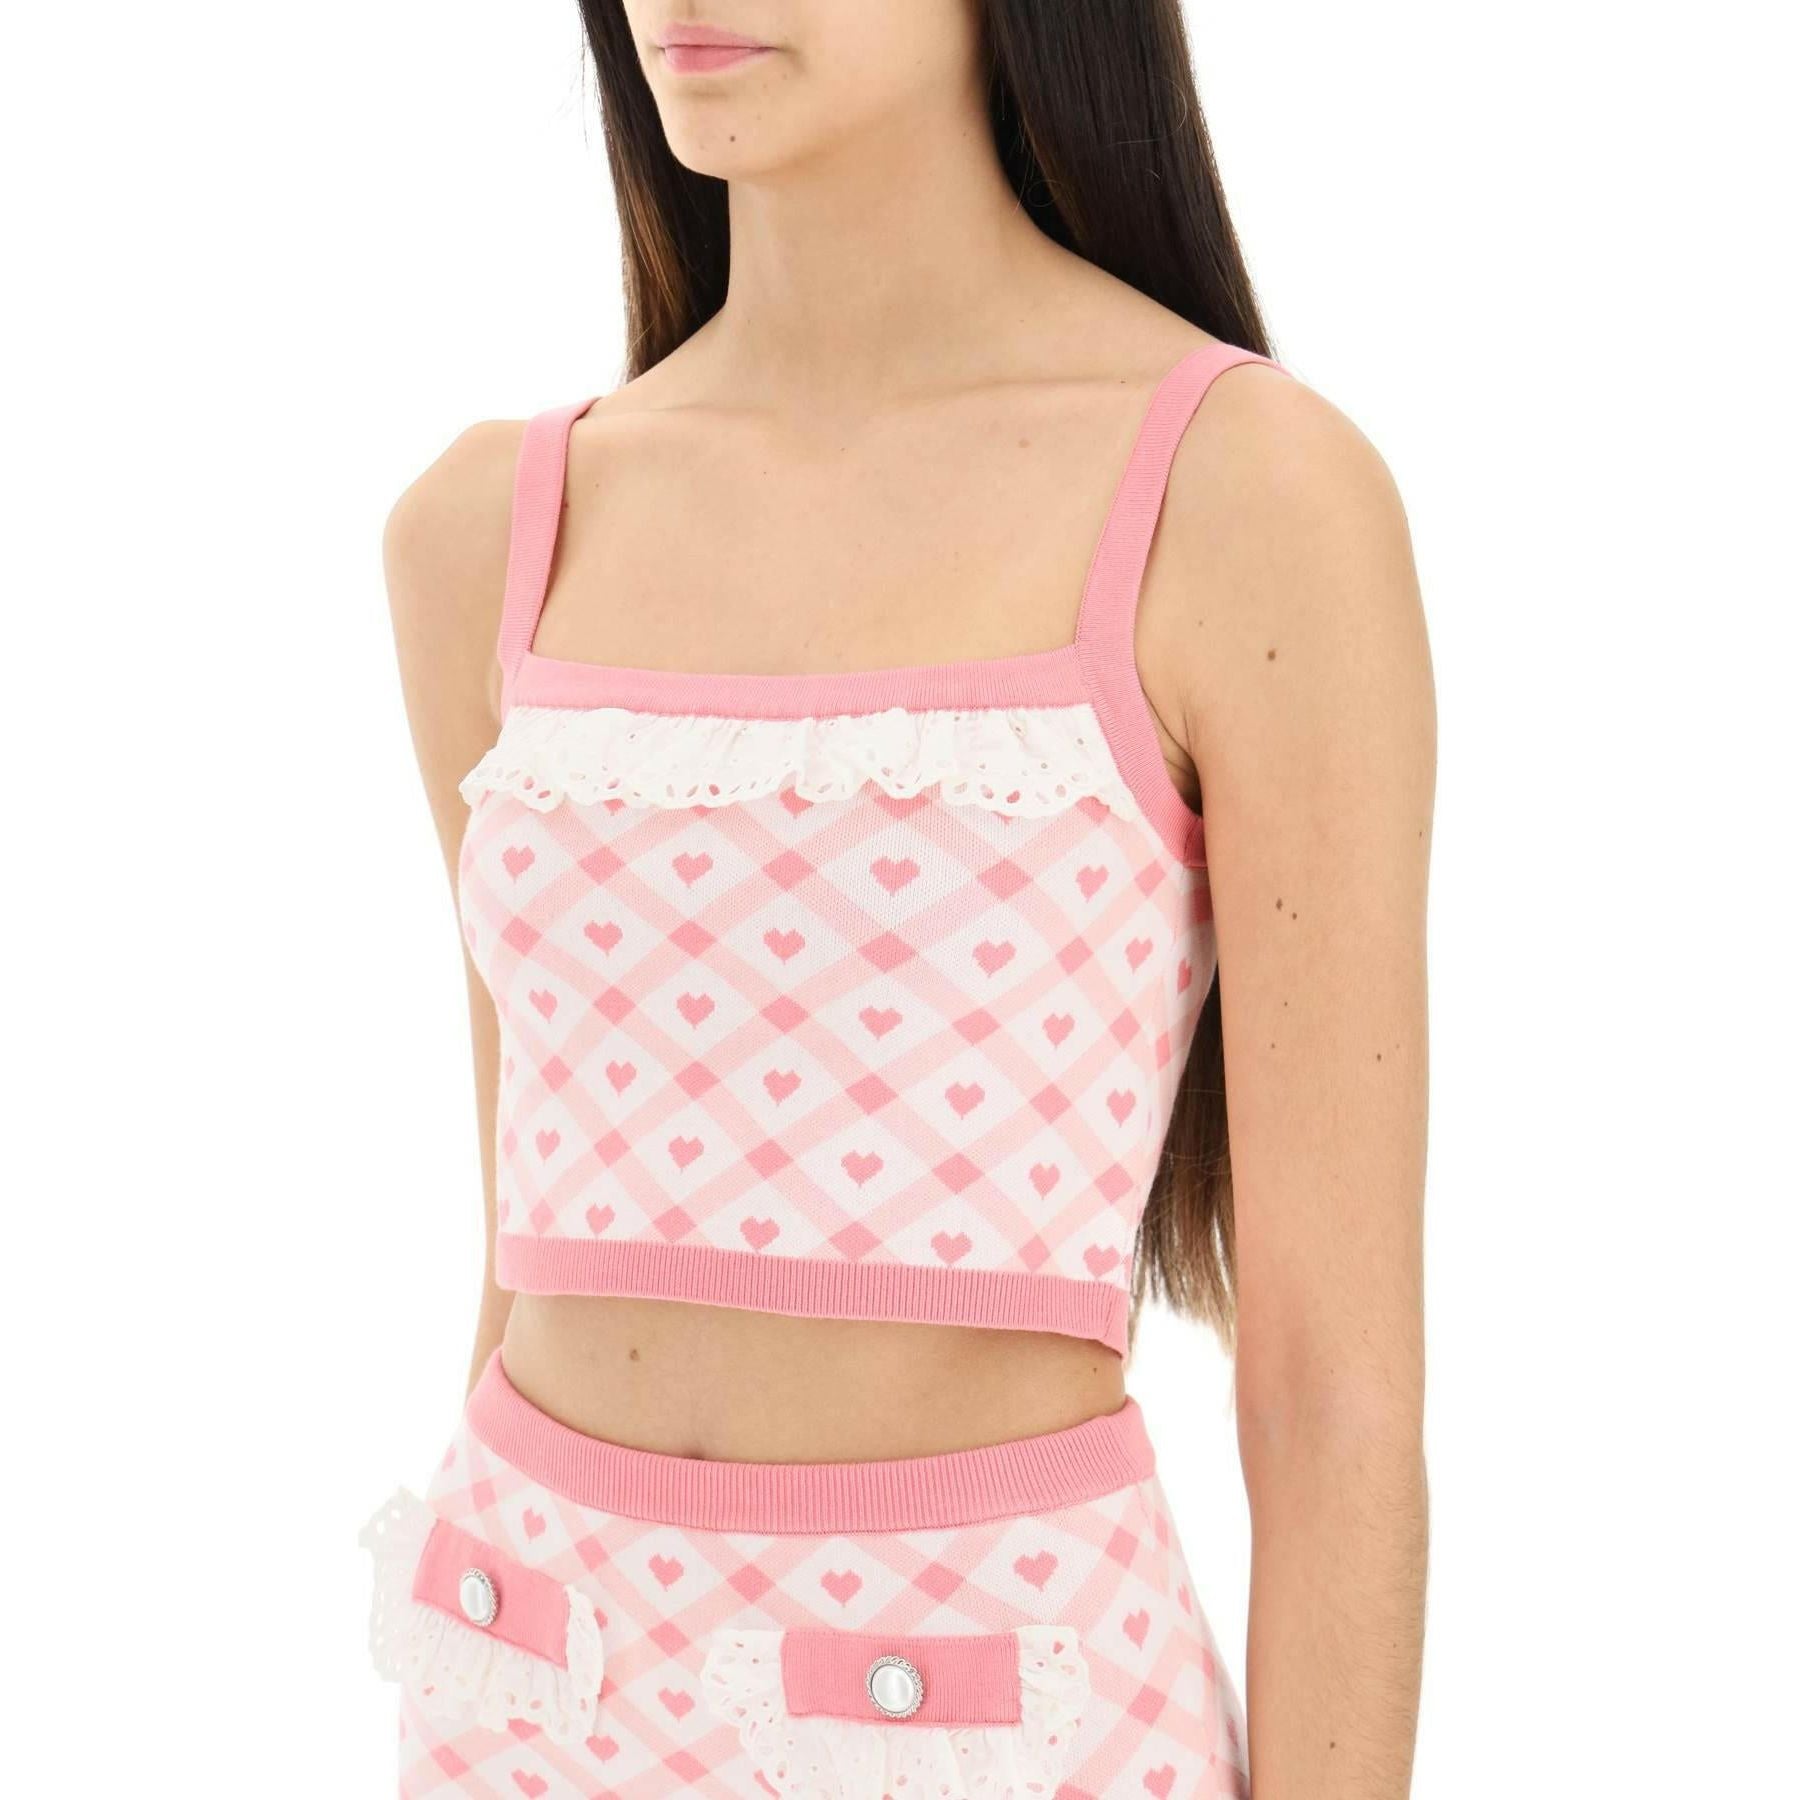 Checked Cropped Top ALESSANDRA RICH JOHN JULIA.